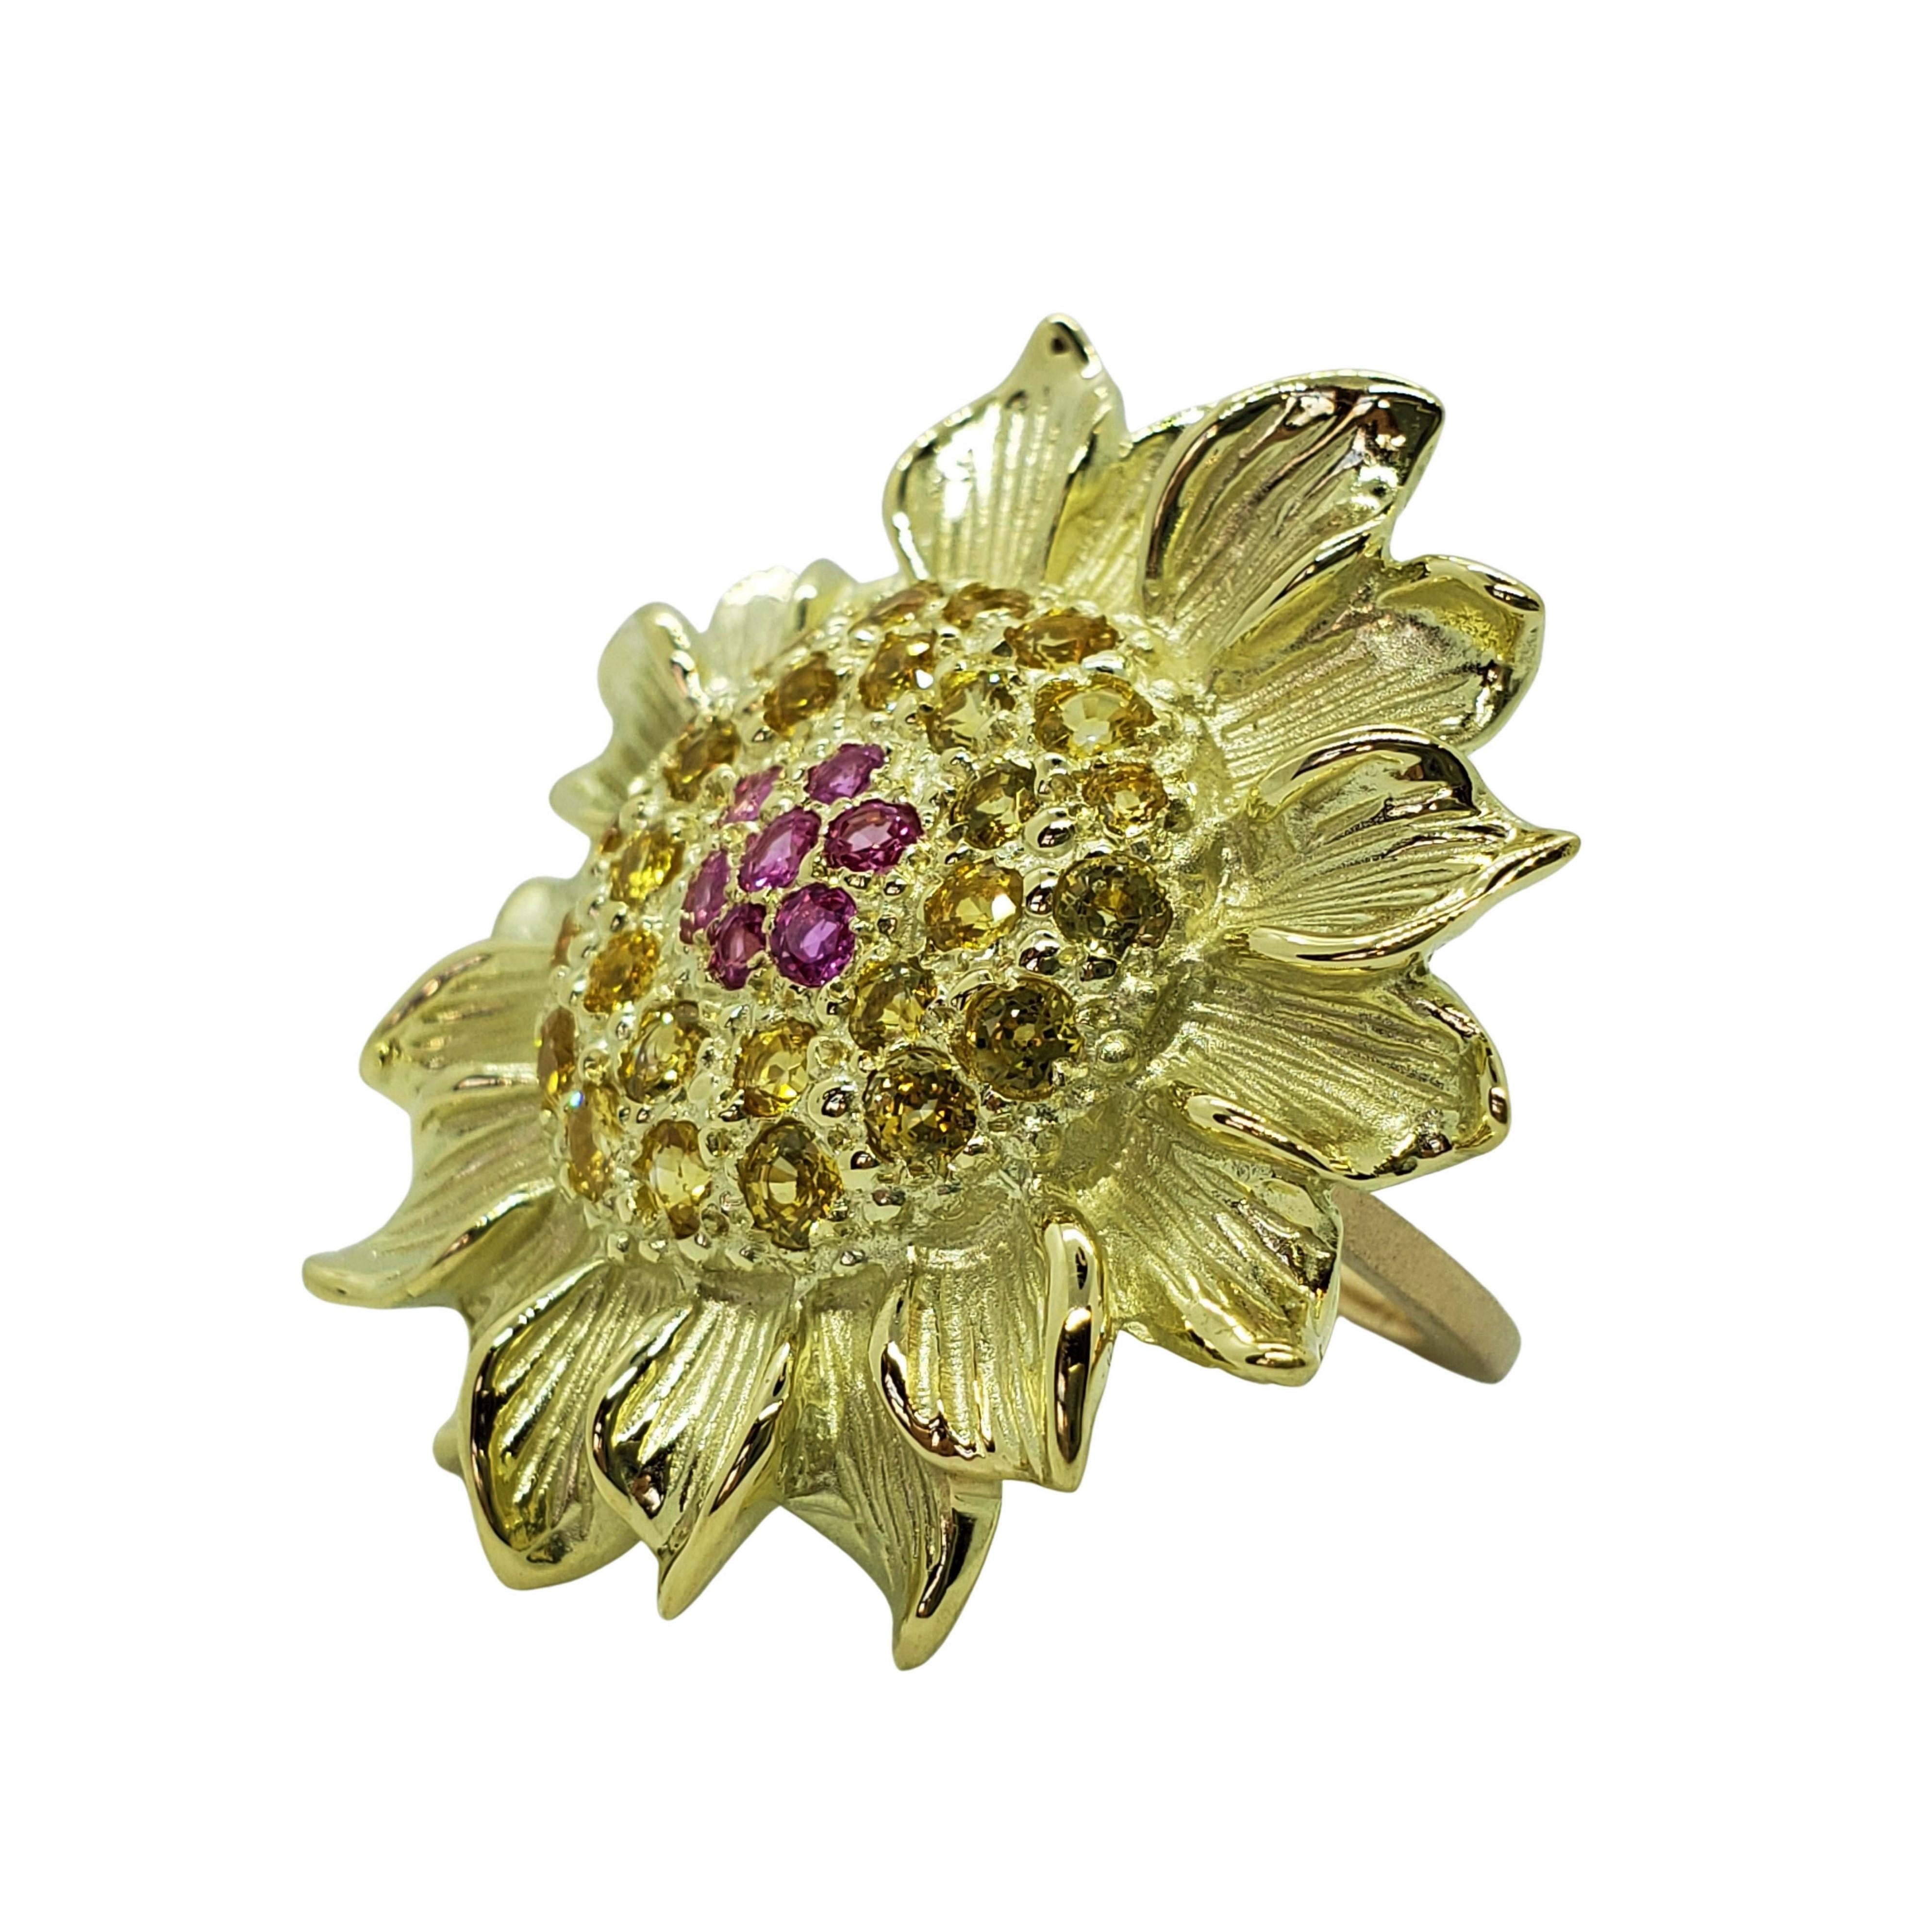 Realistically sculpted Sunflower ring in 14K green gold with pink and yellow sapphires. Bold is not a strong enough descriptive, this ring will get alot of eyes on it and conversations started. A favorite of clients for the artistic interpretation